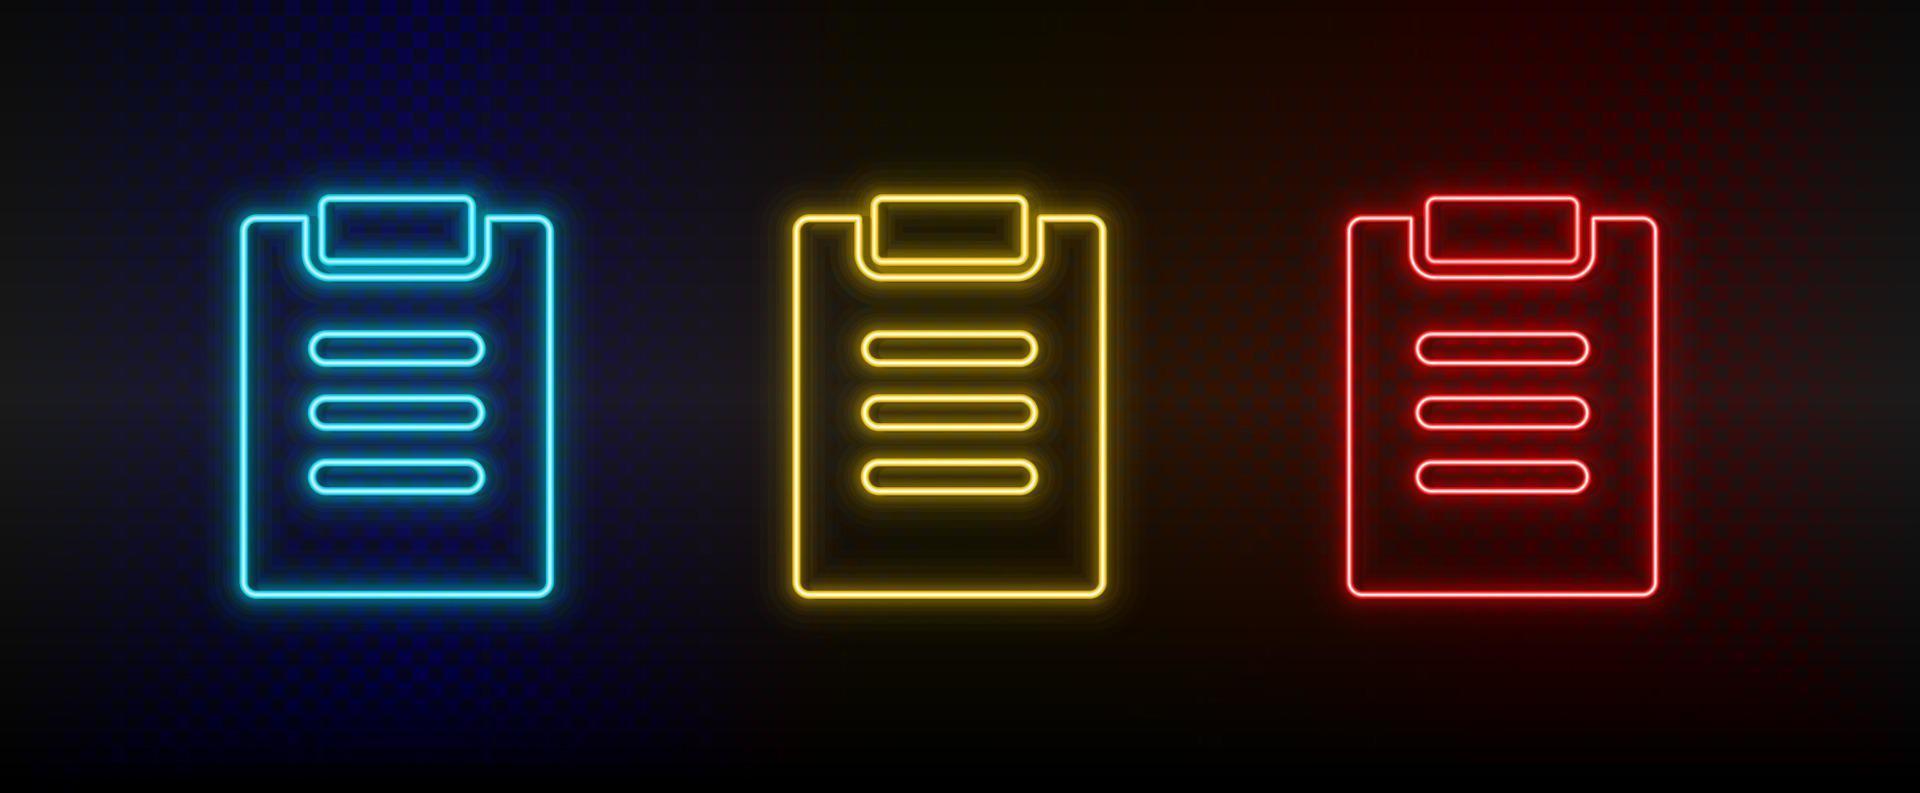 Neon icon set facture, test. Set of red, blue, yellow neon vector icon on dark background